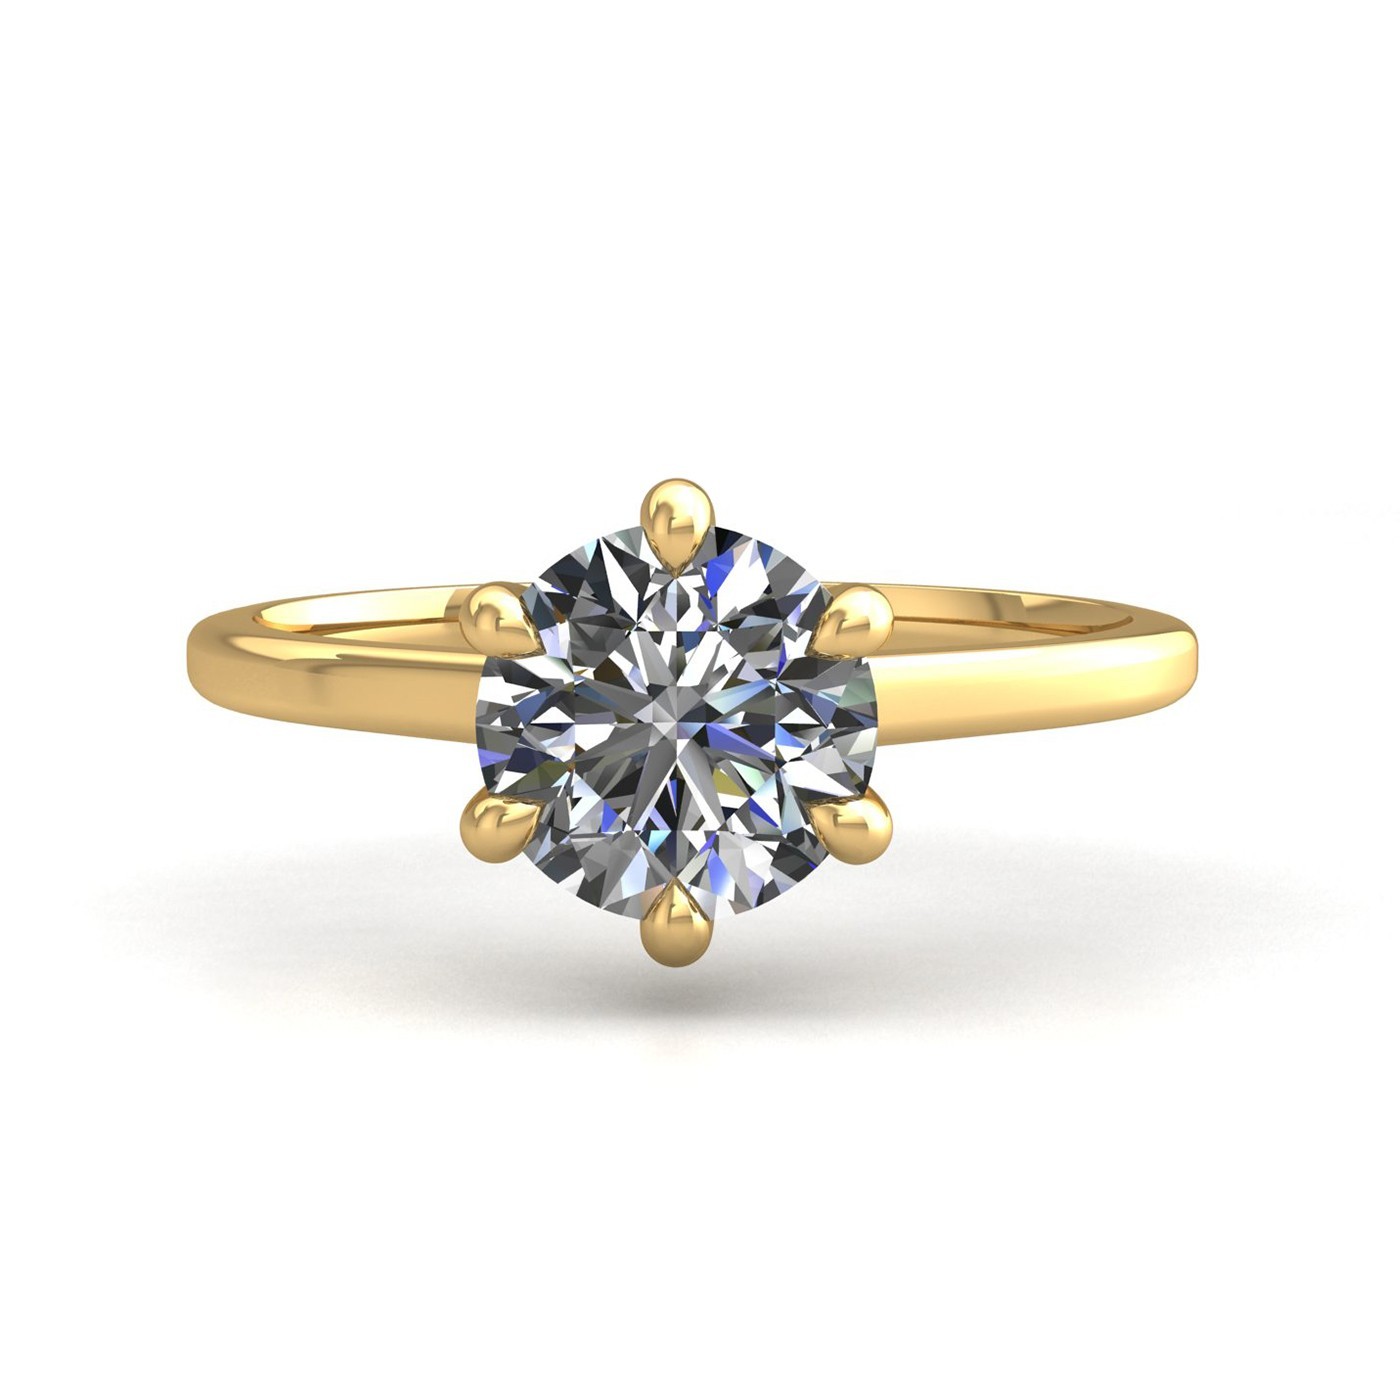 18k yellow gold 2,00 ct 6 prongs solitaire round cut diamond engagement ring with whisper thin band Photos & images